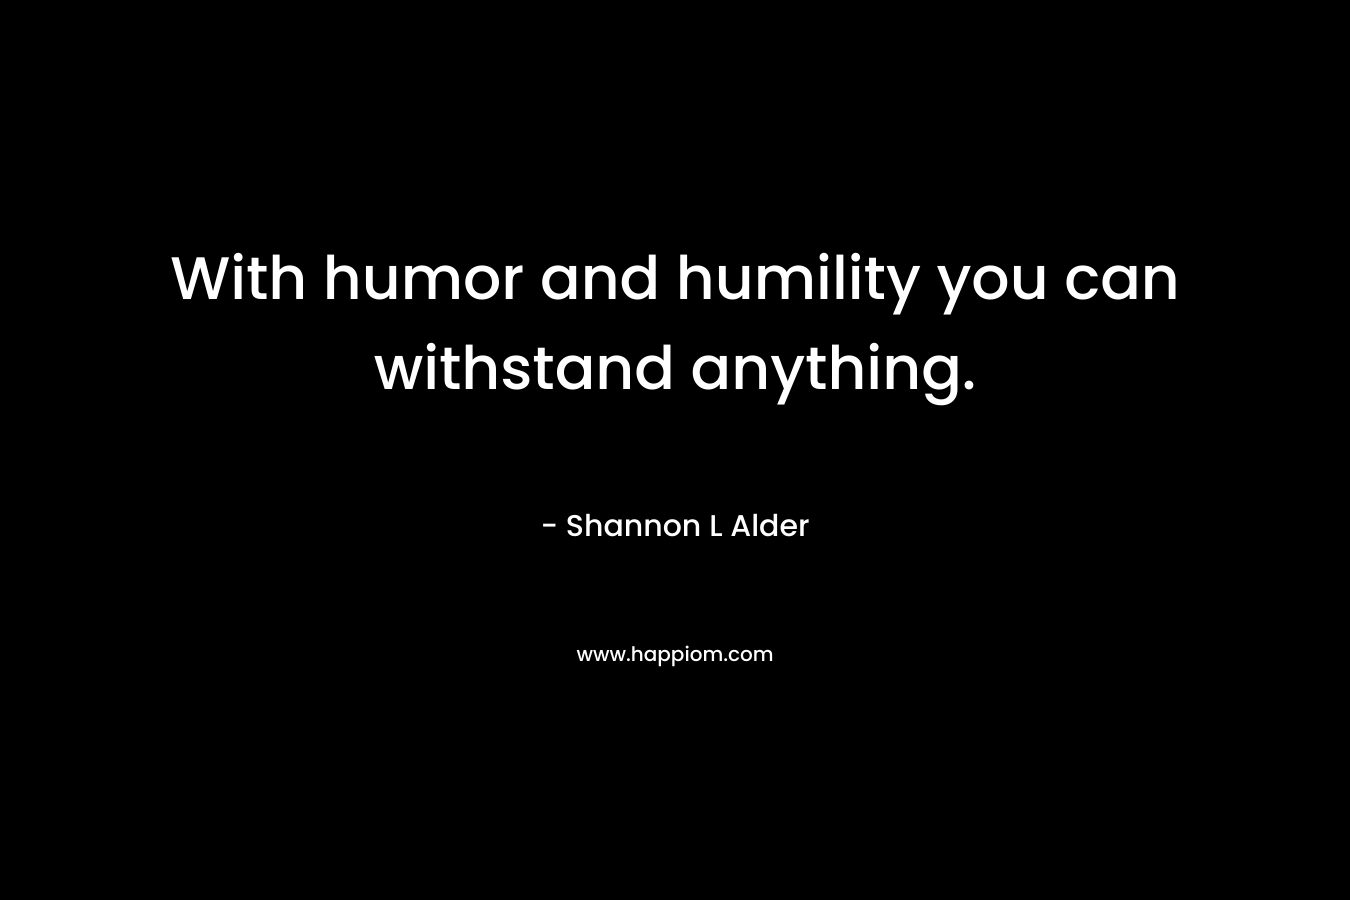 With humor and humility you can withstand anything.